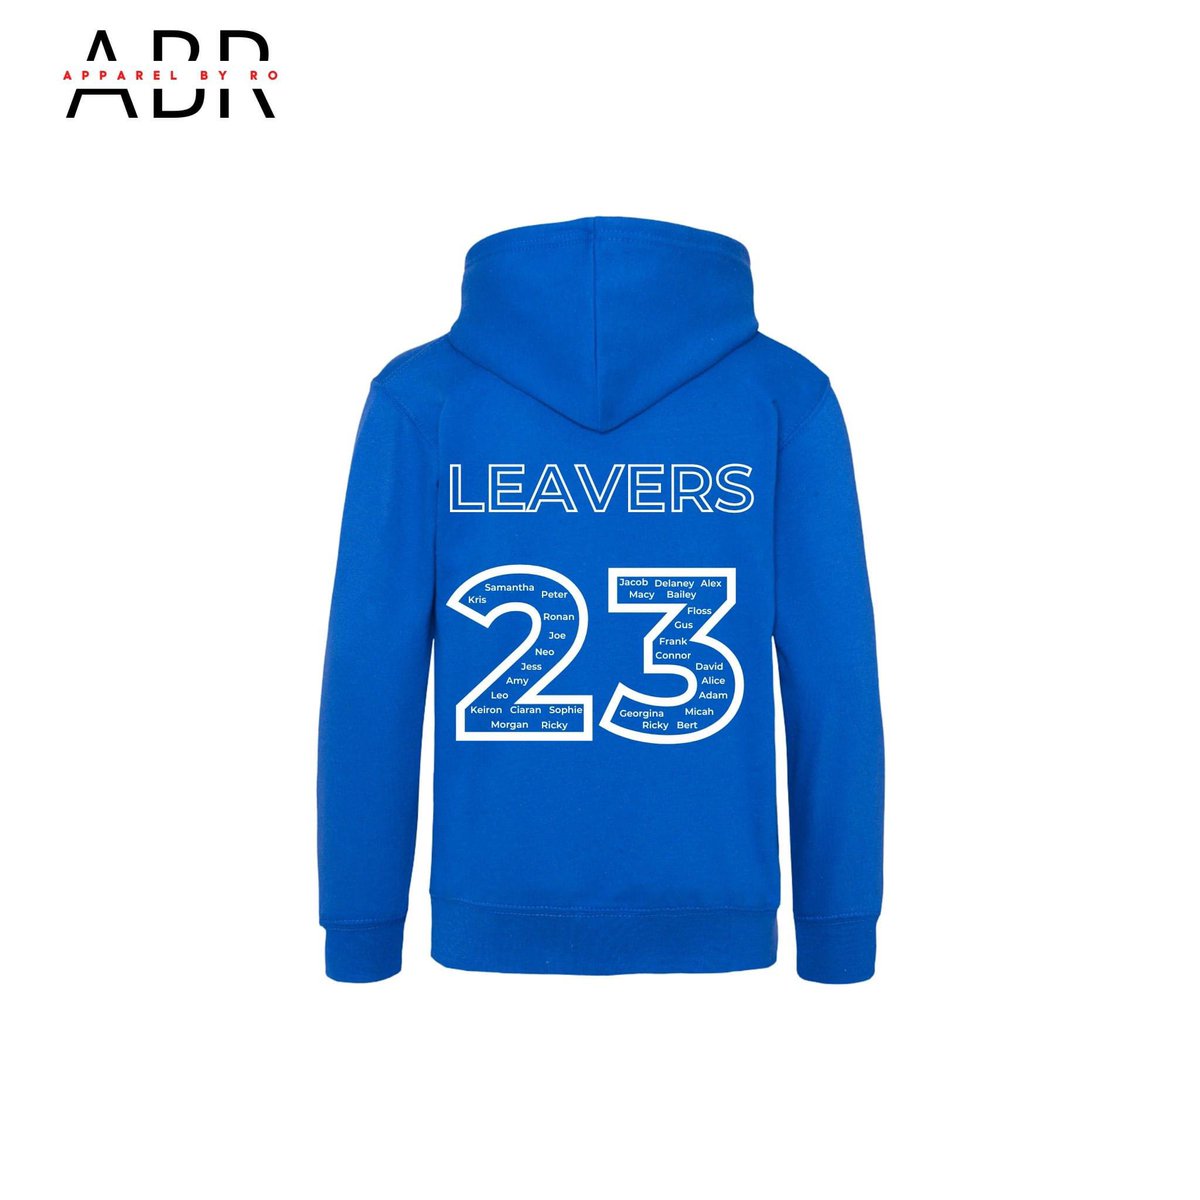 📢Attention all schools & PTAs📢 

Get ready for the Leavers of 2023 with hoodies from ABR, the perfect way to celebrate the end of school days

Full personalisation available🤩

Contact us or visit us at apparelbyro.co.uk to find out more #Leavers2023 #leavershoodies